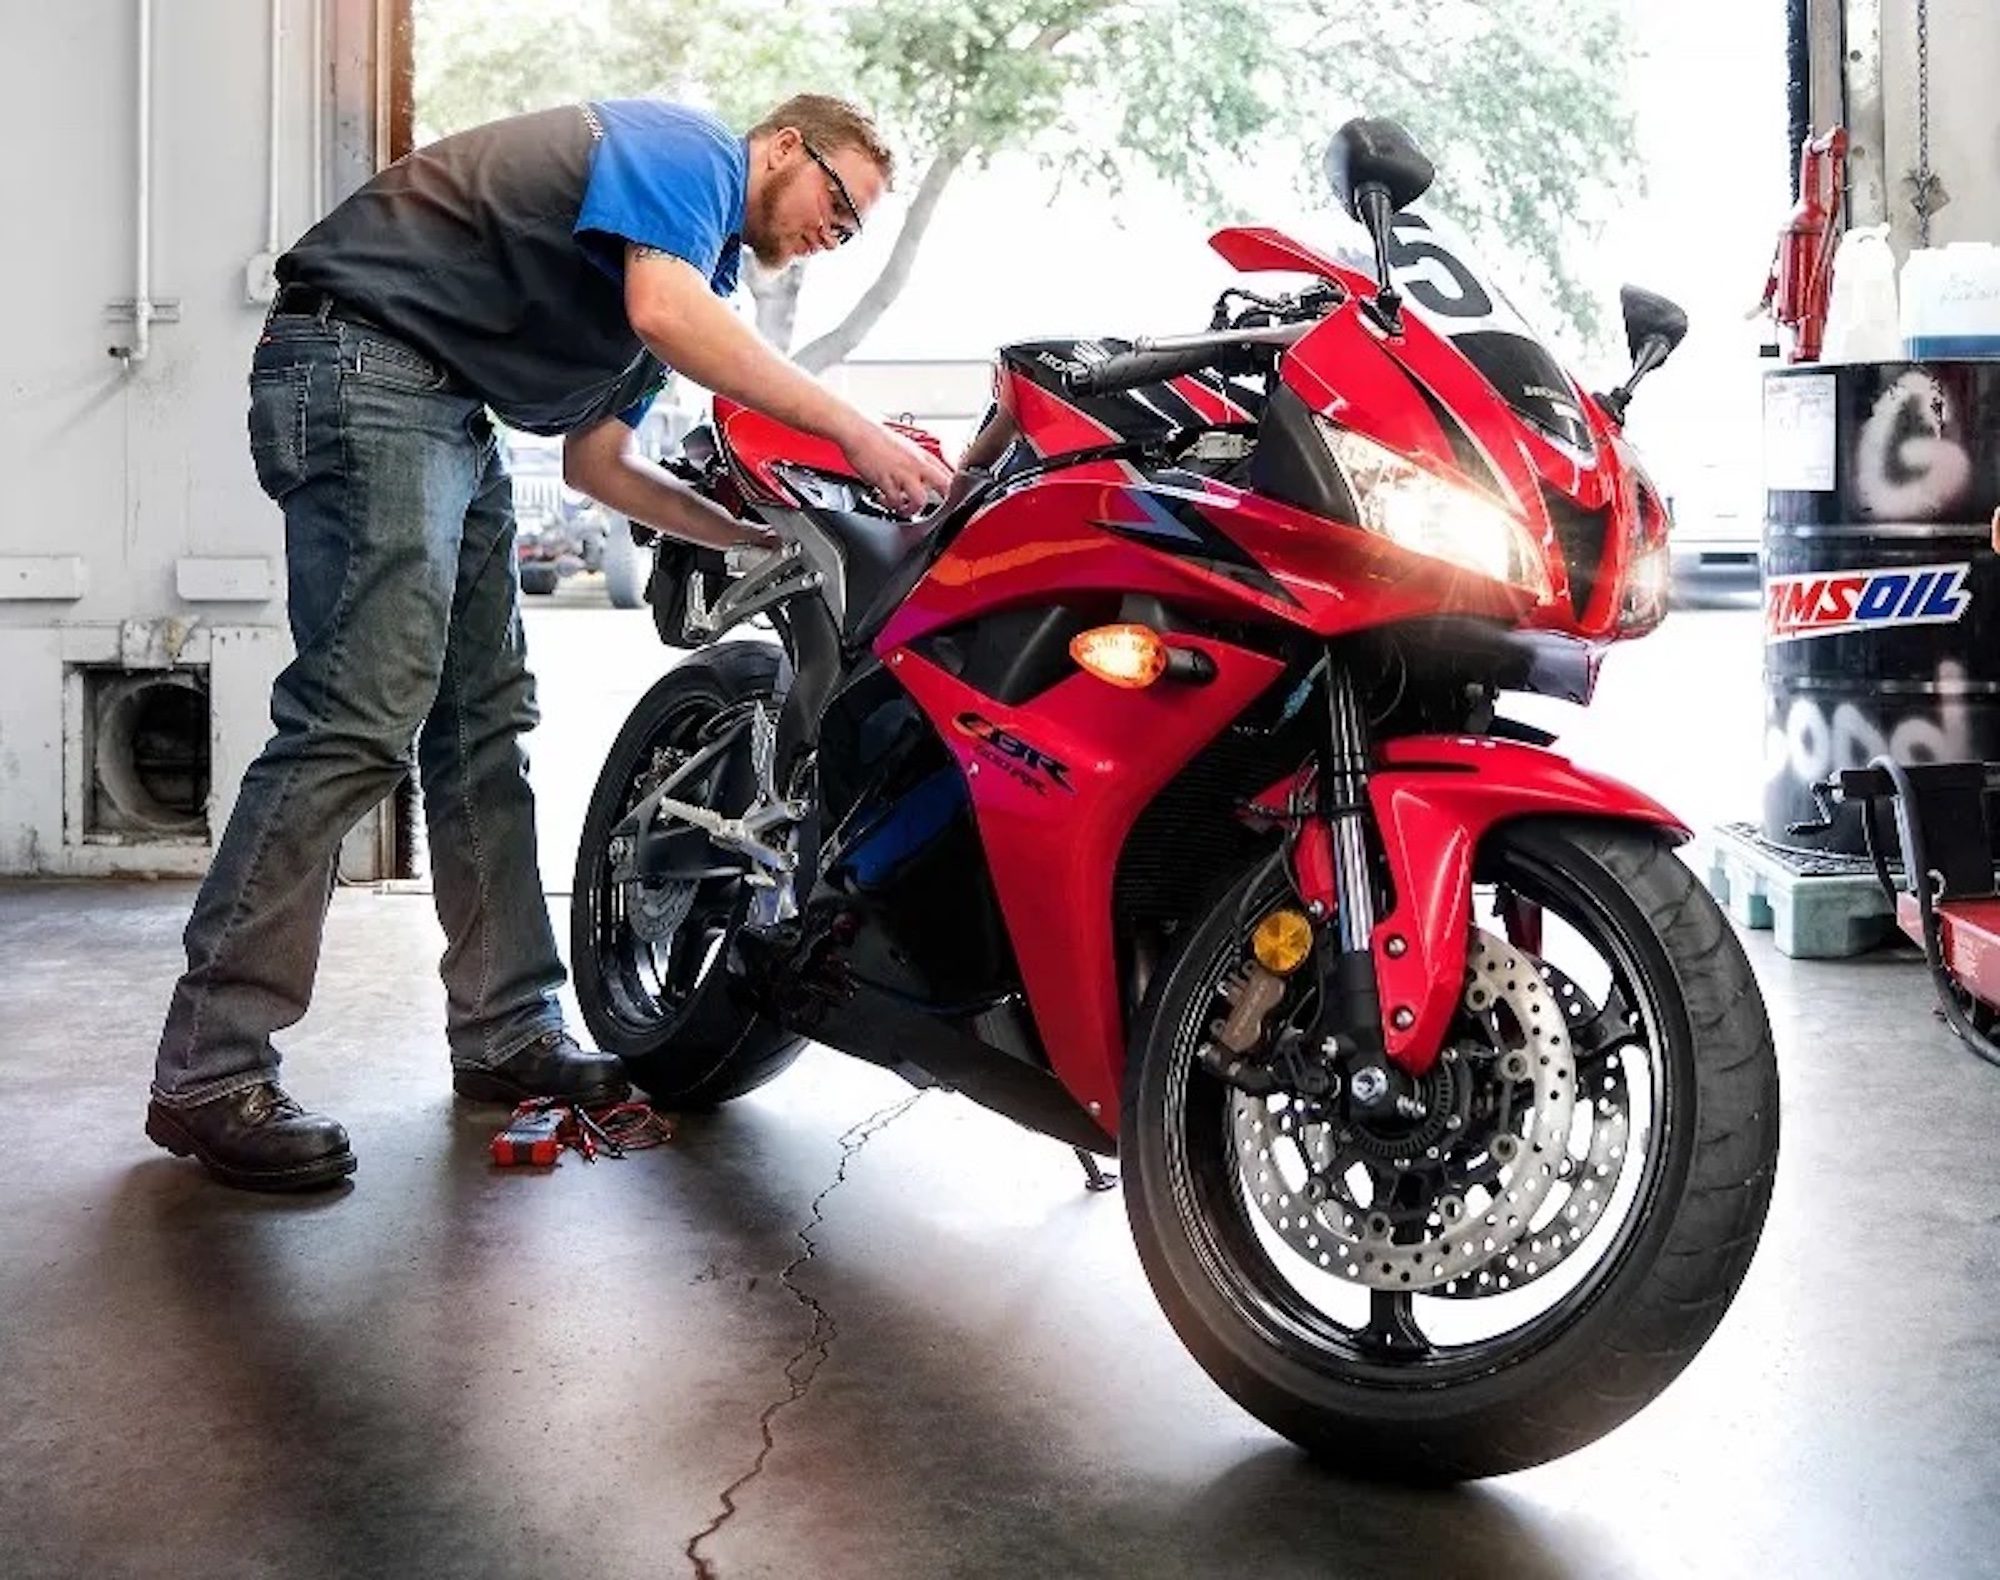 A motorcycle technician. Media sourced from the Universal Technical Institute (UTI).